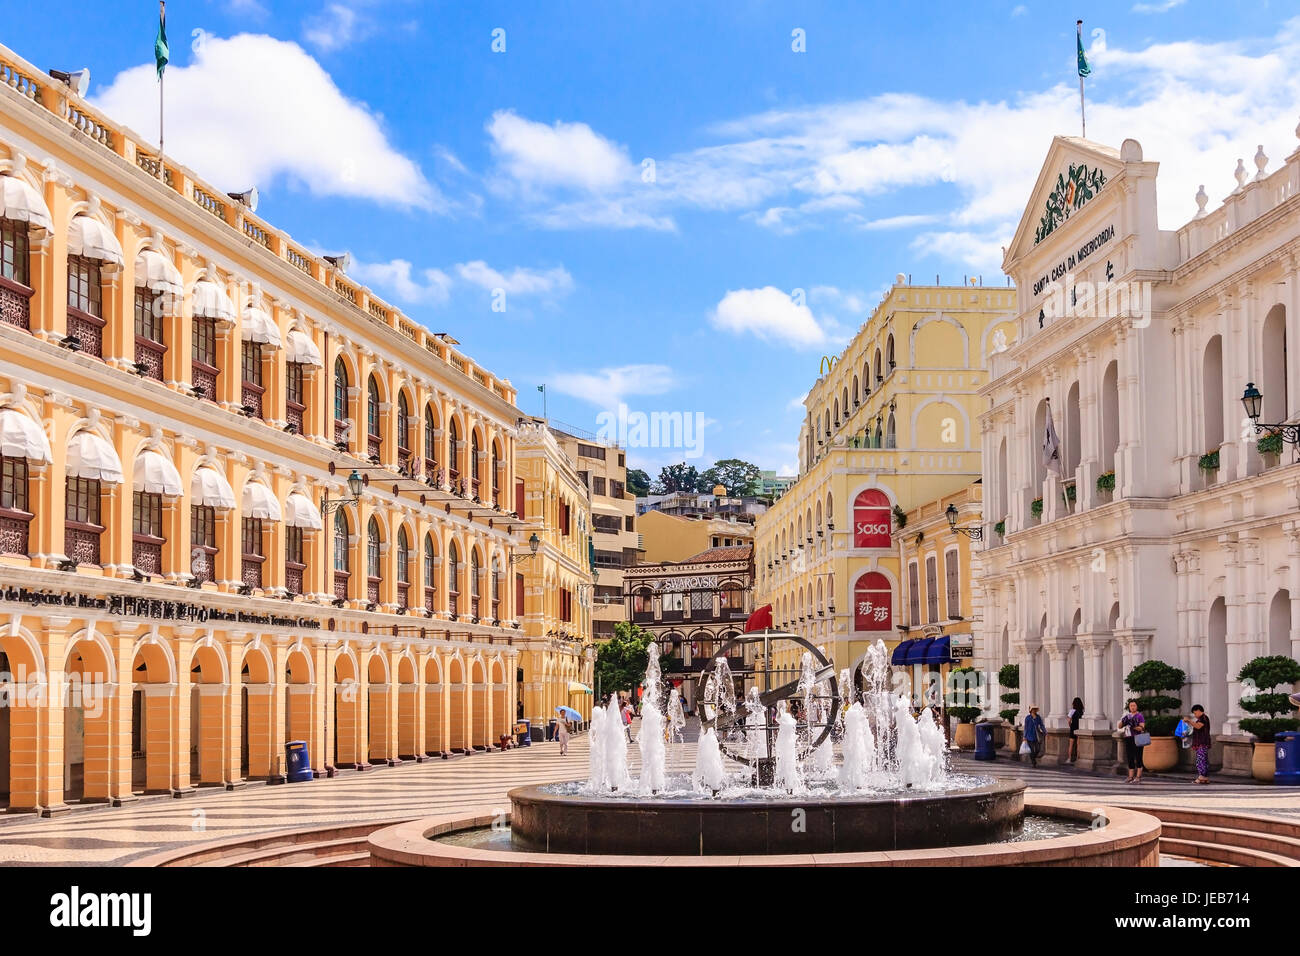 MACAU, CHINA - JULY 22, 2013: Historic Centre of Macau-Senado Square in Macau, China. The Historic Centre of Macau was inscribed on the UNESCO World H Stock Photo